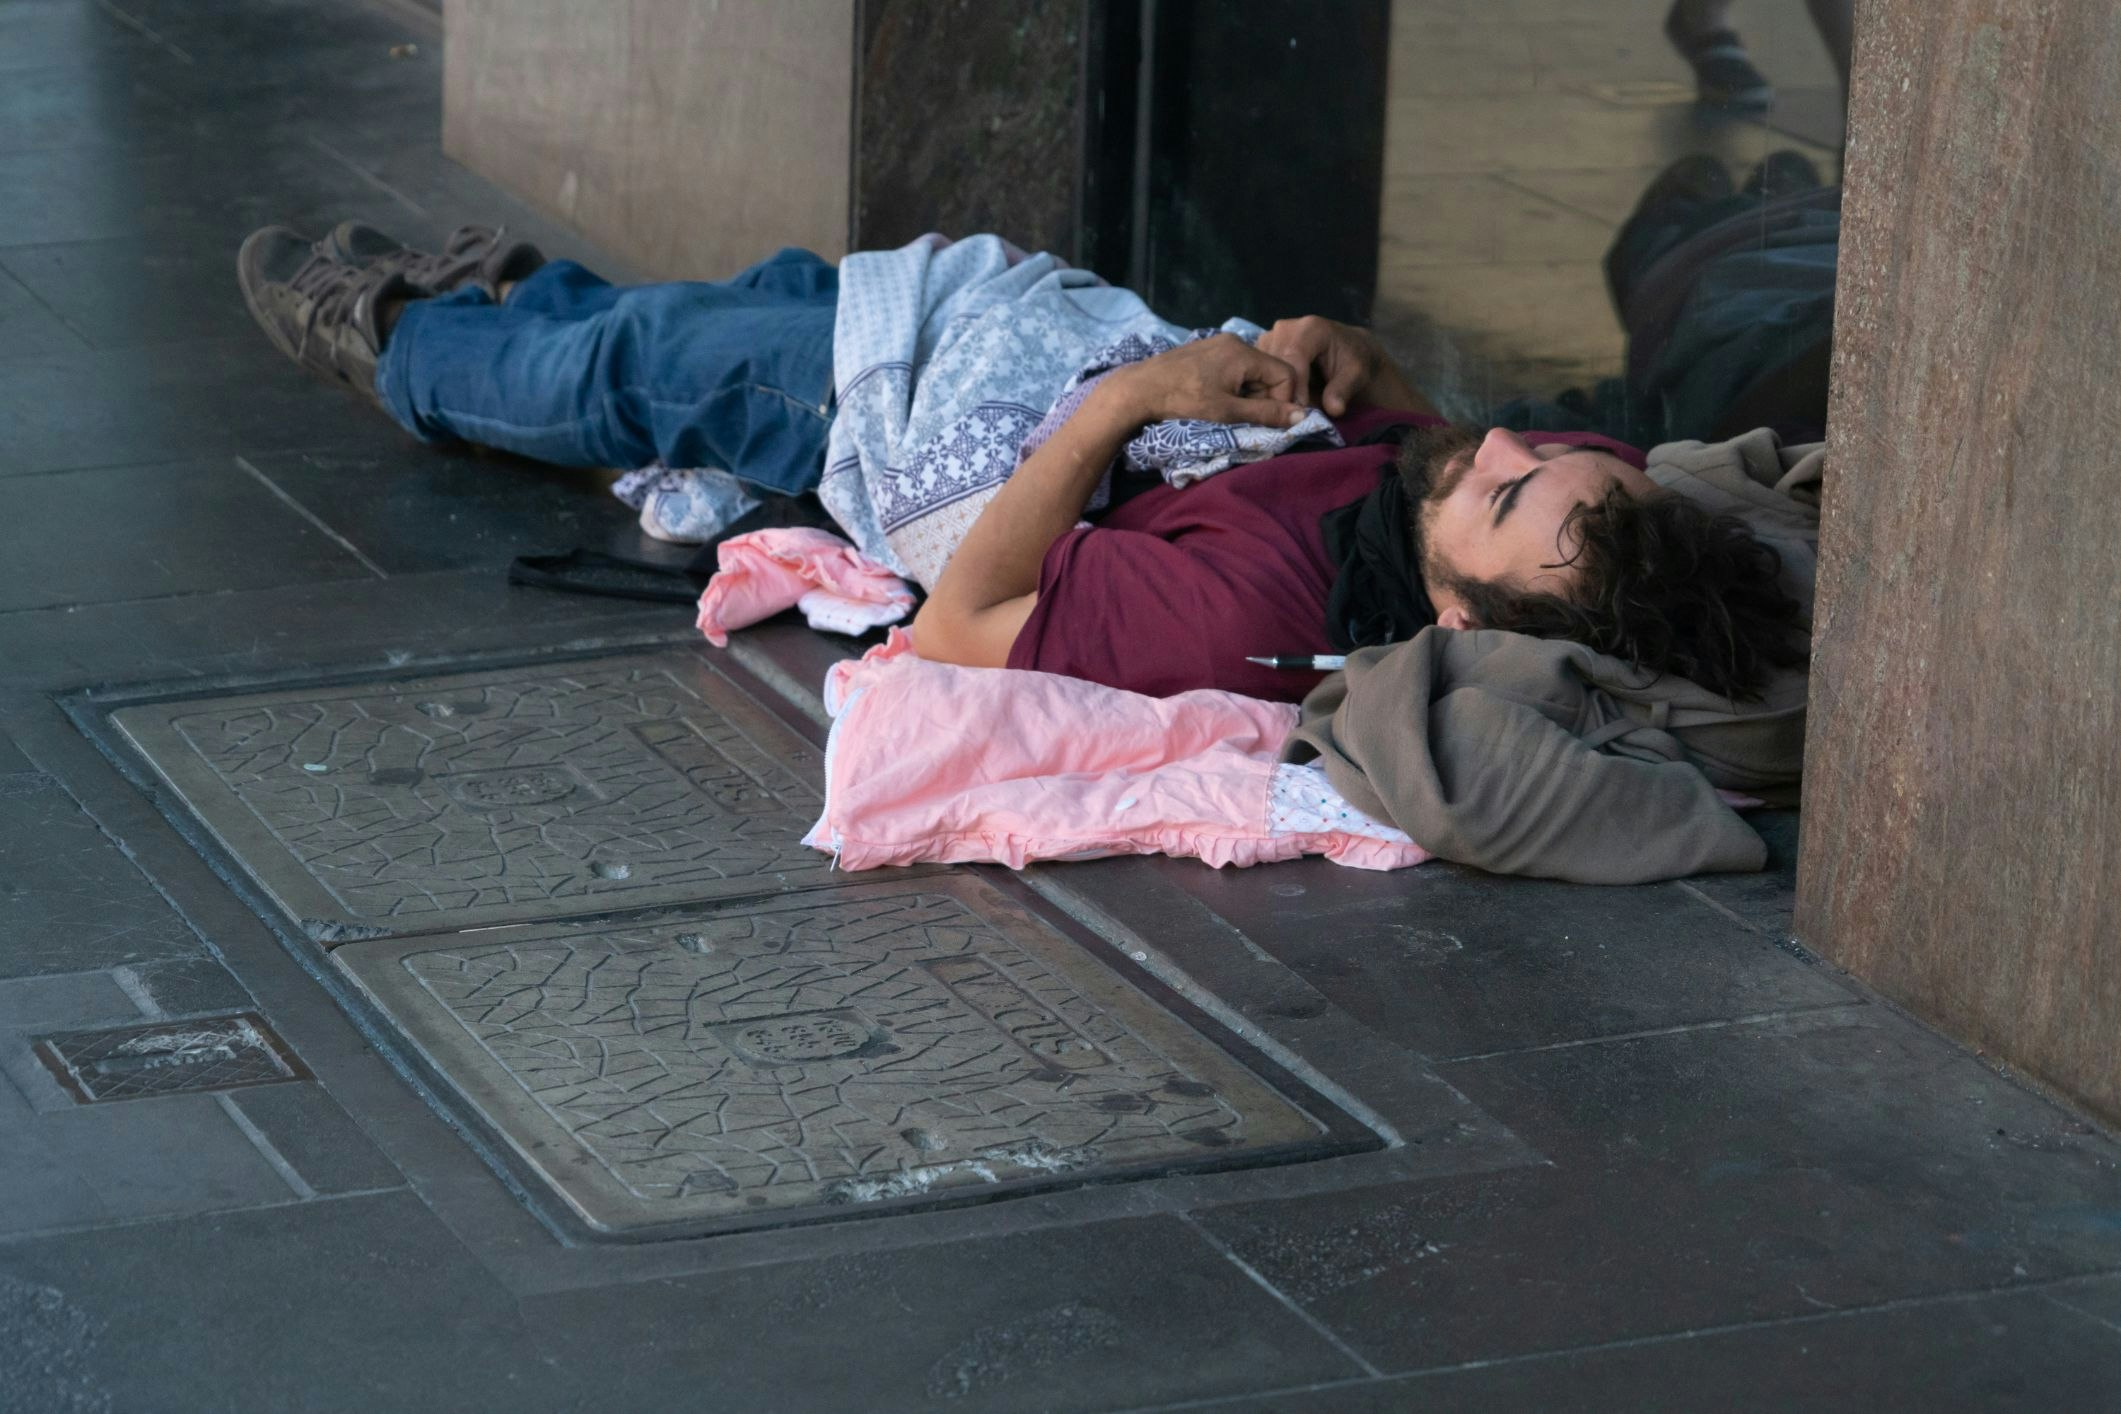 <p>This Anti-Poverty Week, October 15 – 27, The Salvation Army has urged vulnerable Australians to reach out for financial support as the current cost-of-living crisis continues to hit hard. [Source: Brian Scantlebury via Shutterstock]</p>
